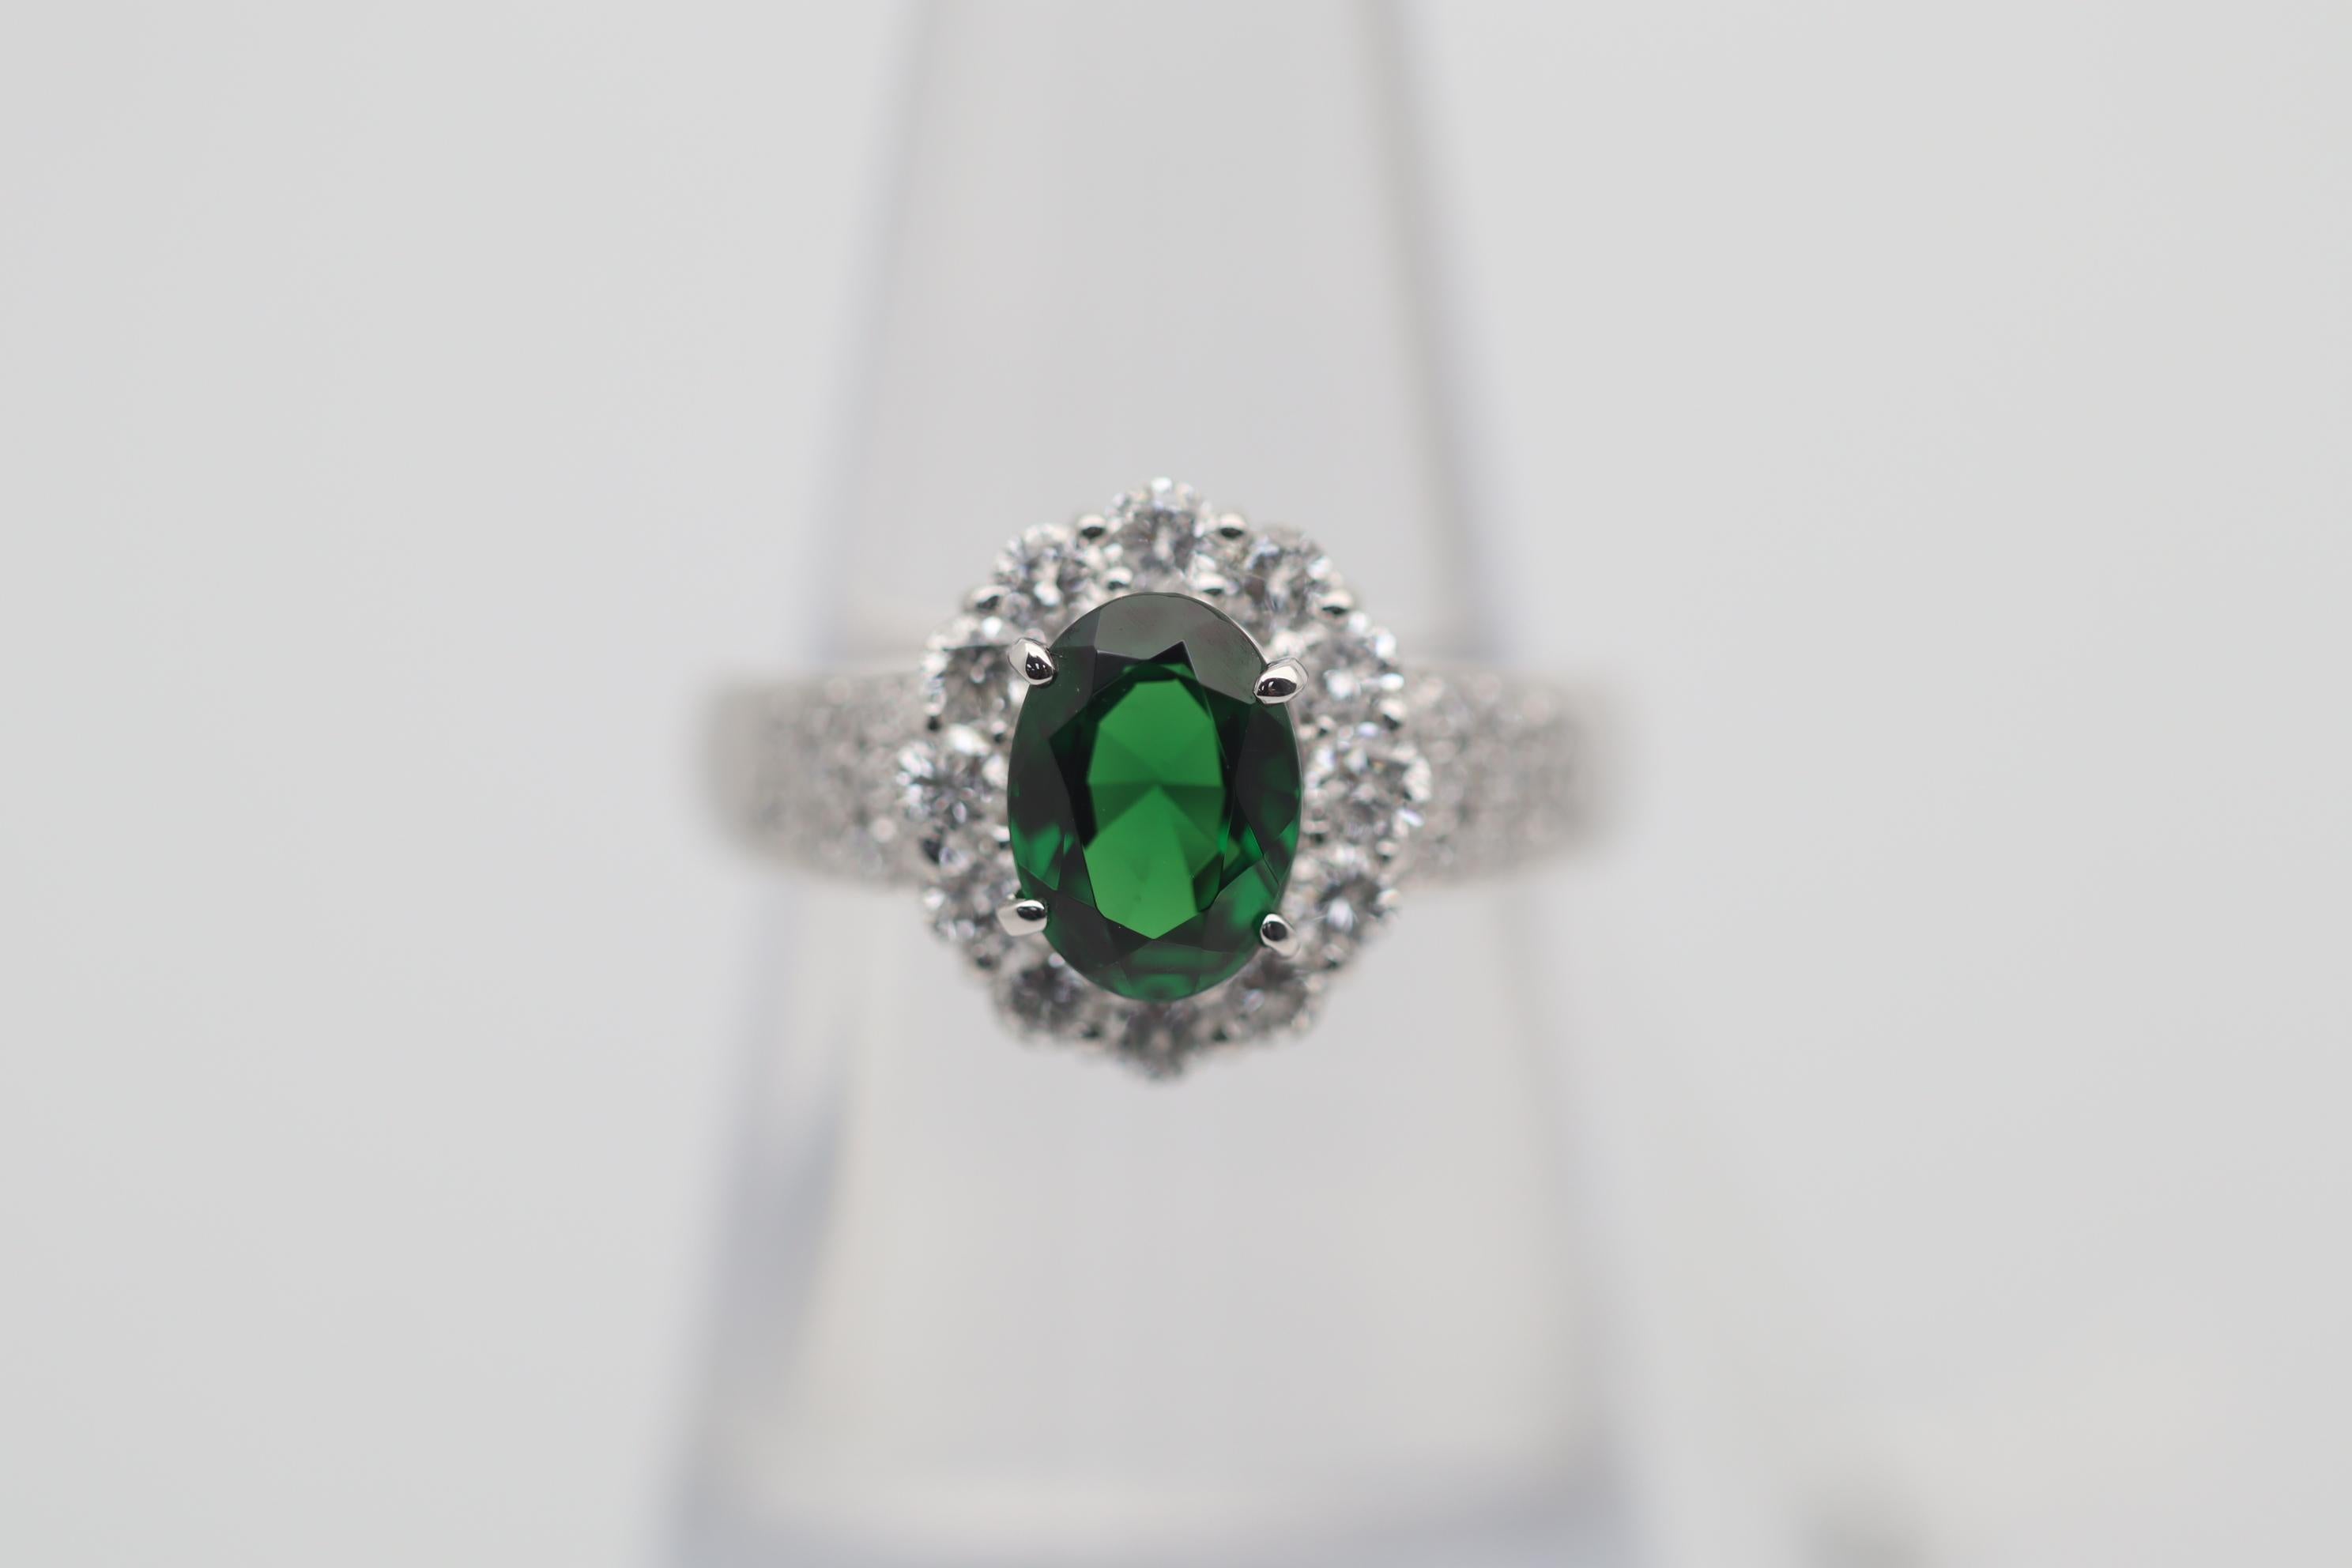 A fine richly saturated tsavorite takes center stage of this platinum ring. It weighs 1.61 carats and has a rich intense green color unique to tsavorites. It is complemented by 0.79 carats of round brilliant-cut diamonds set around the ring adding